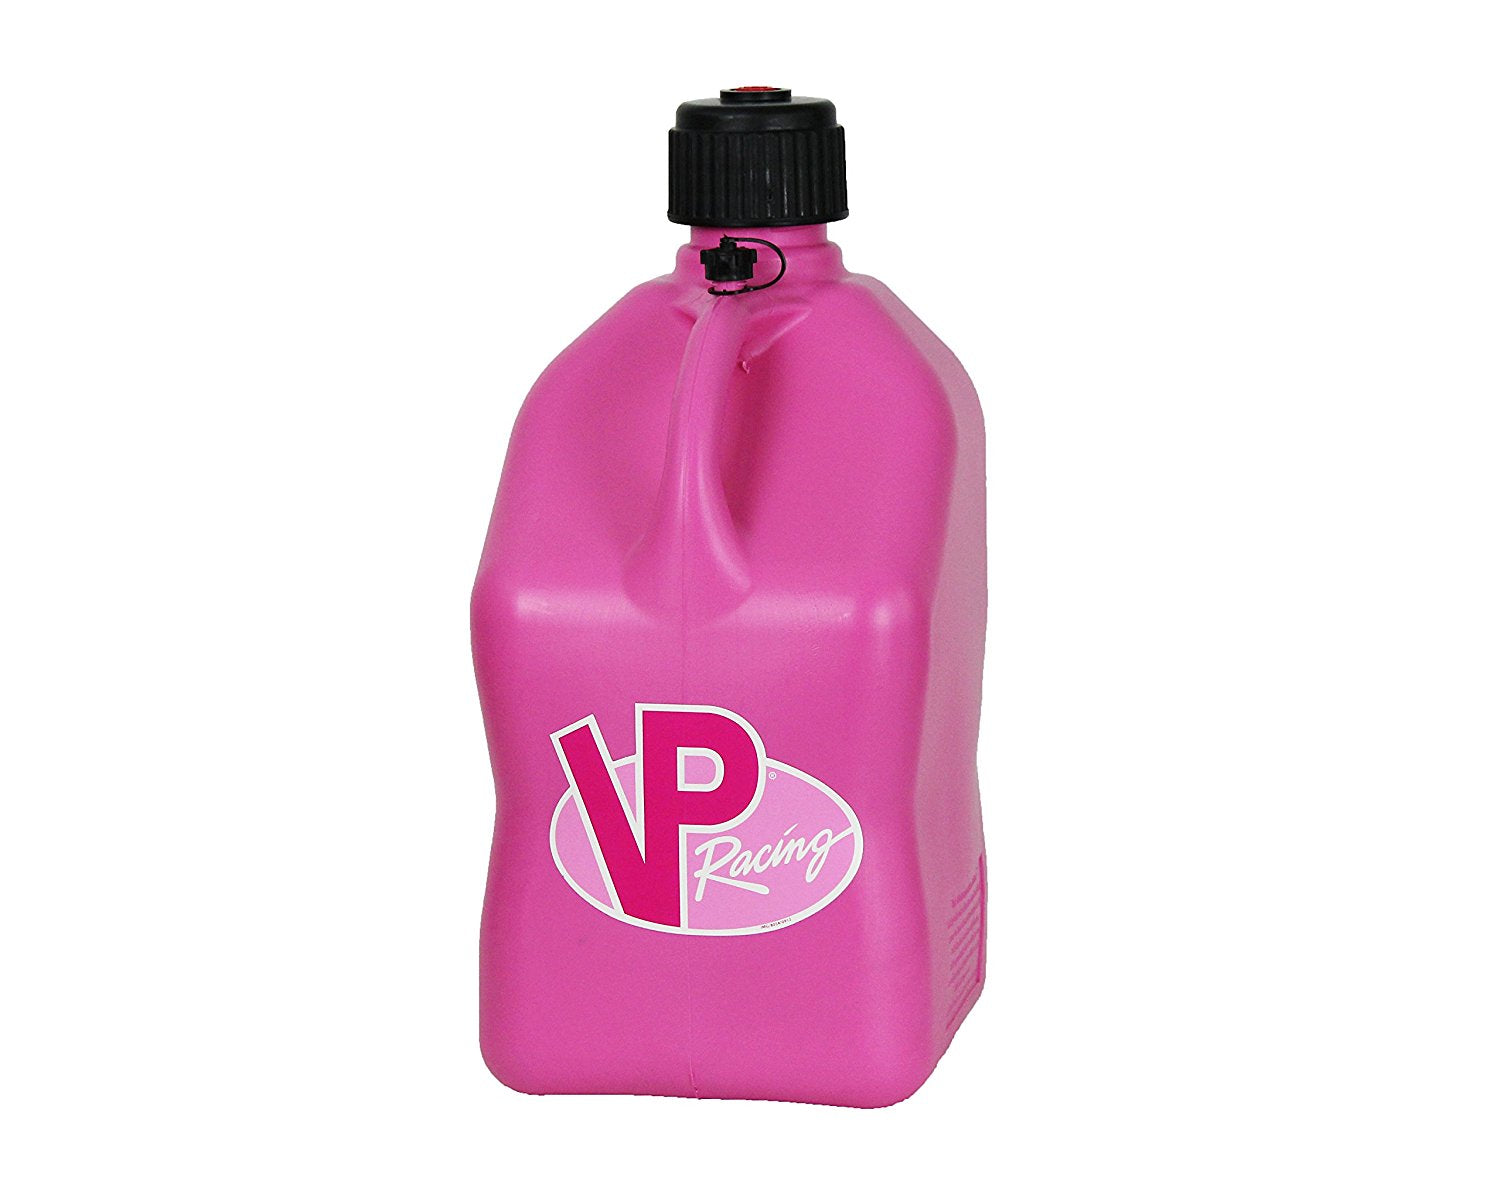 VP RACING 3812 Plastic canister, square, pink (Replacement 3814) Photo-0 